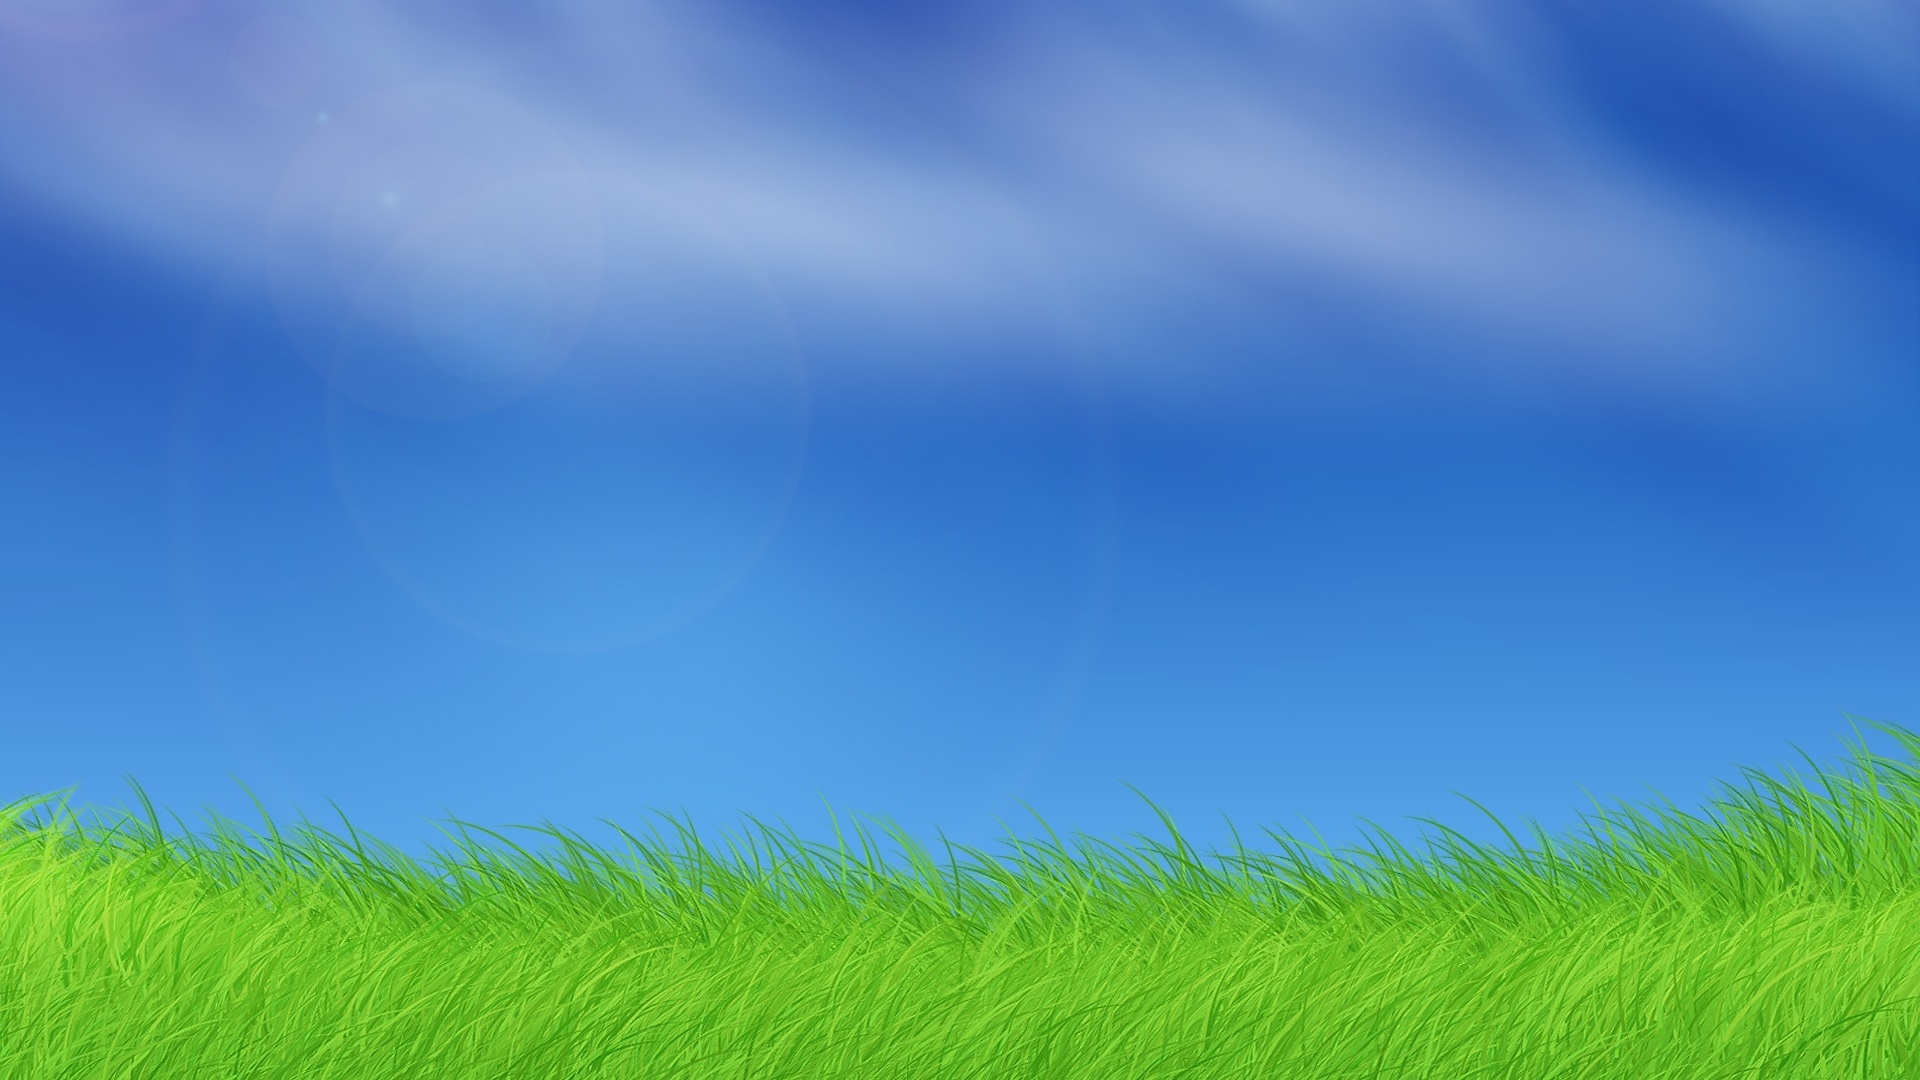 Sky And Grass wallpaper photo hd